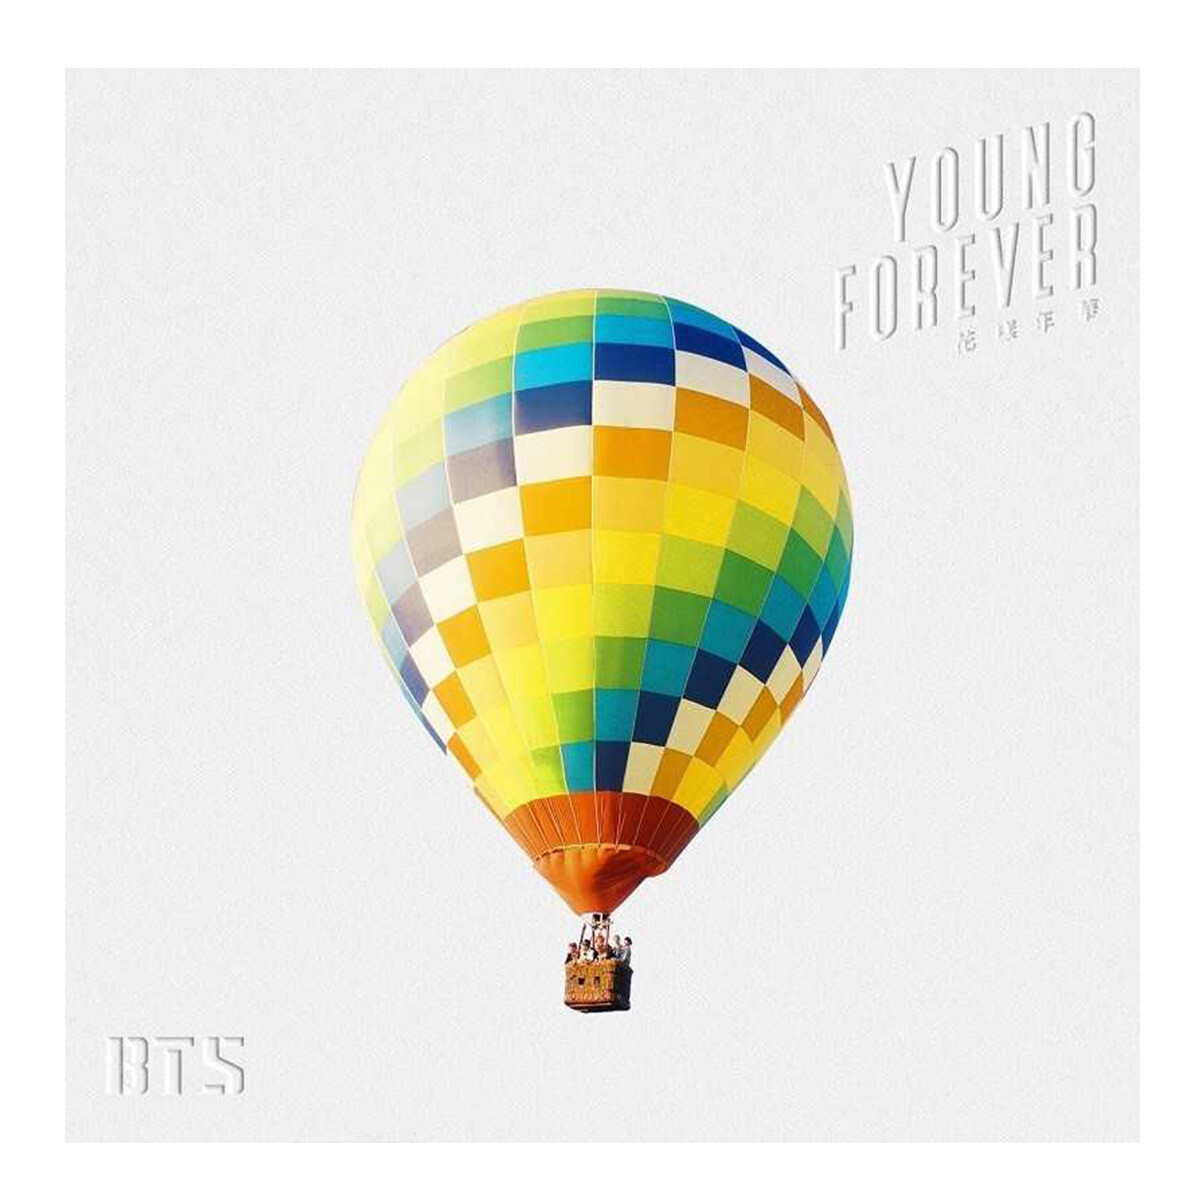 Bts-young Forever - Cd 